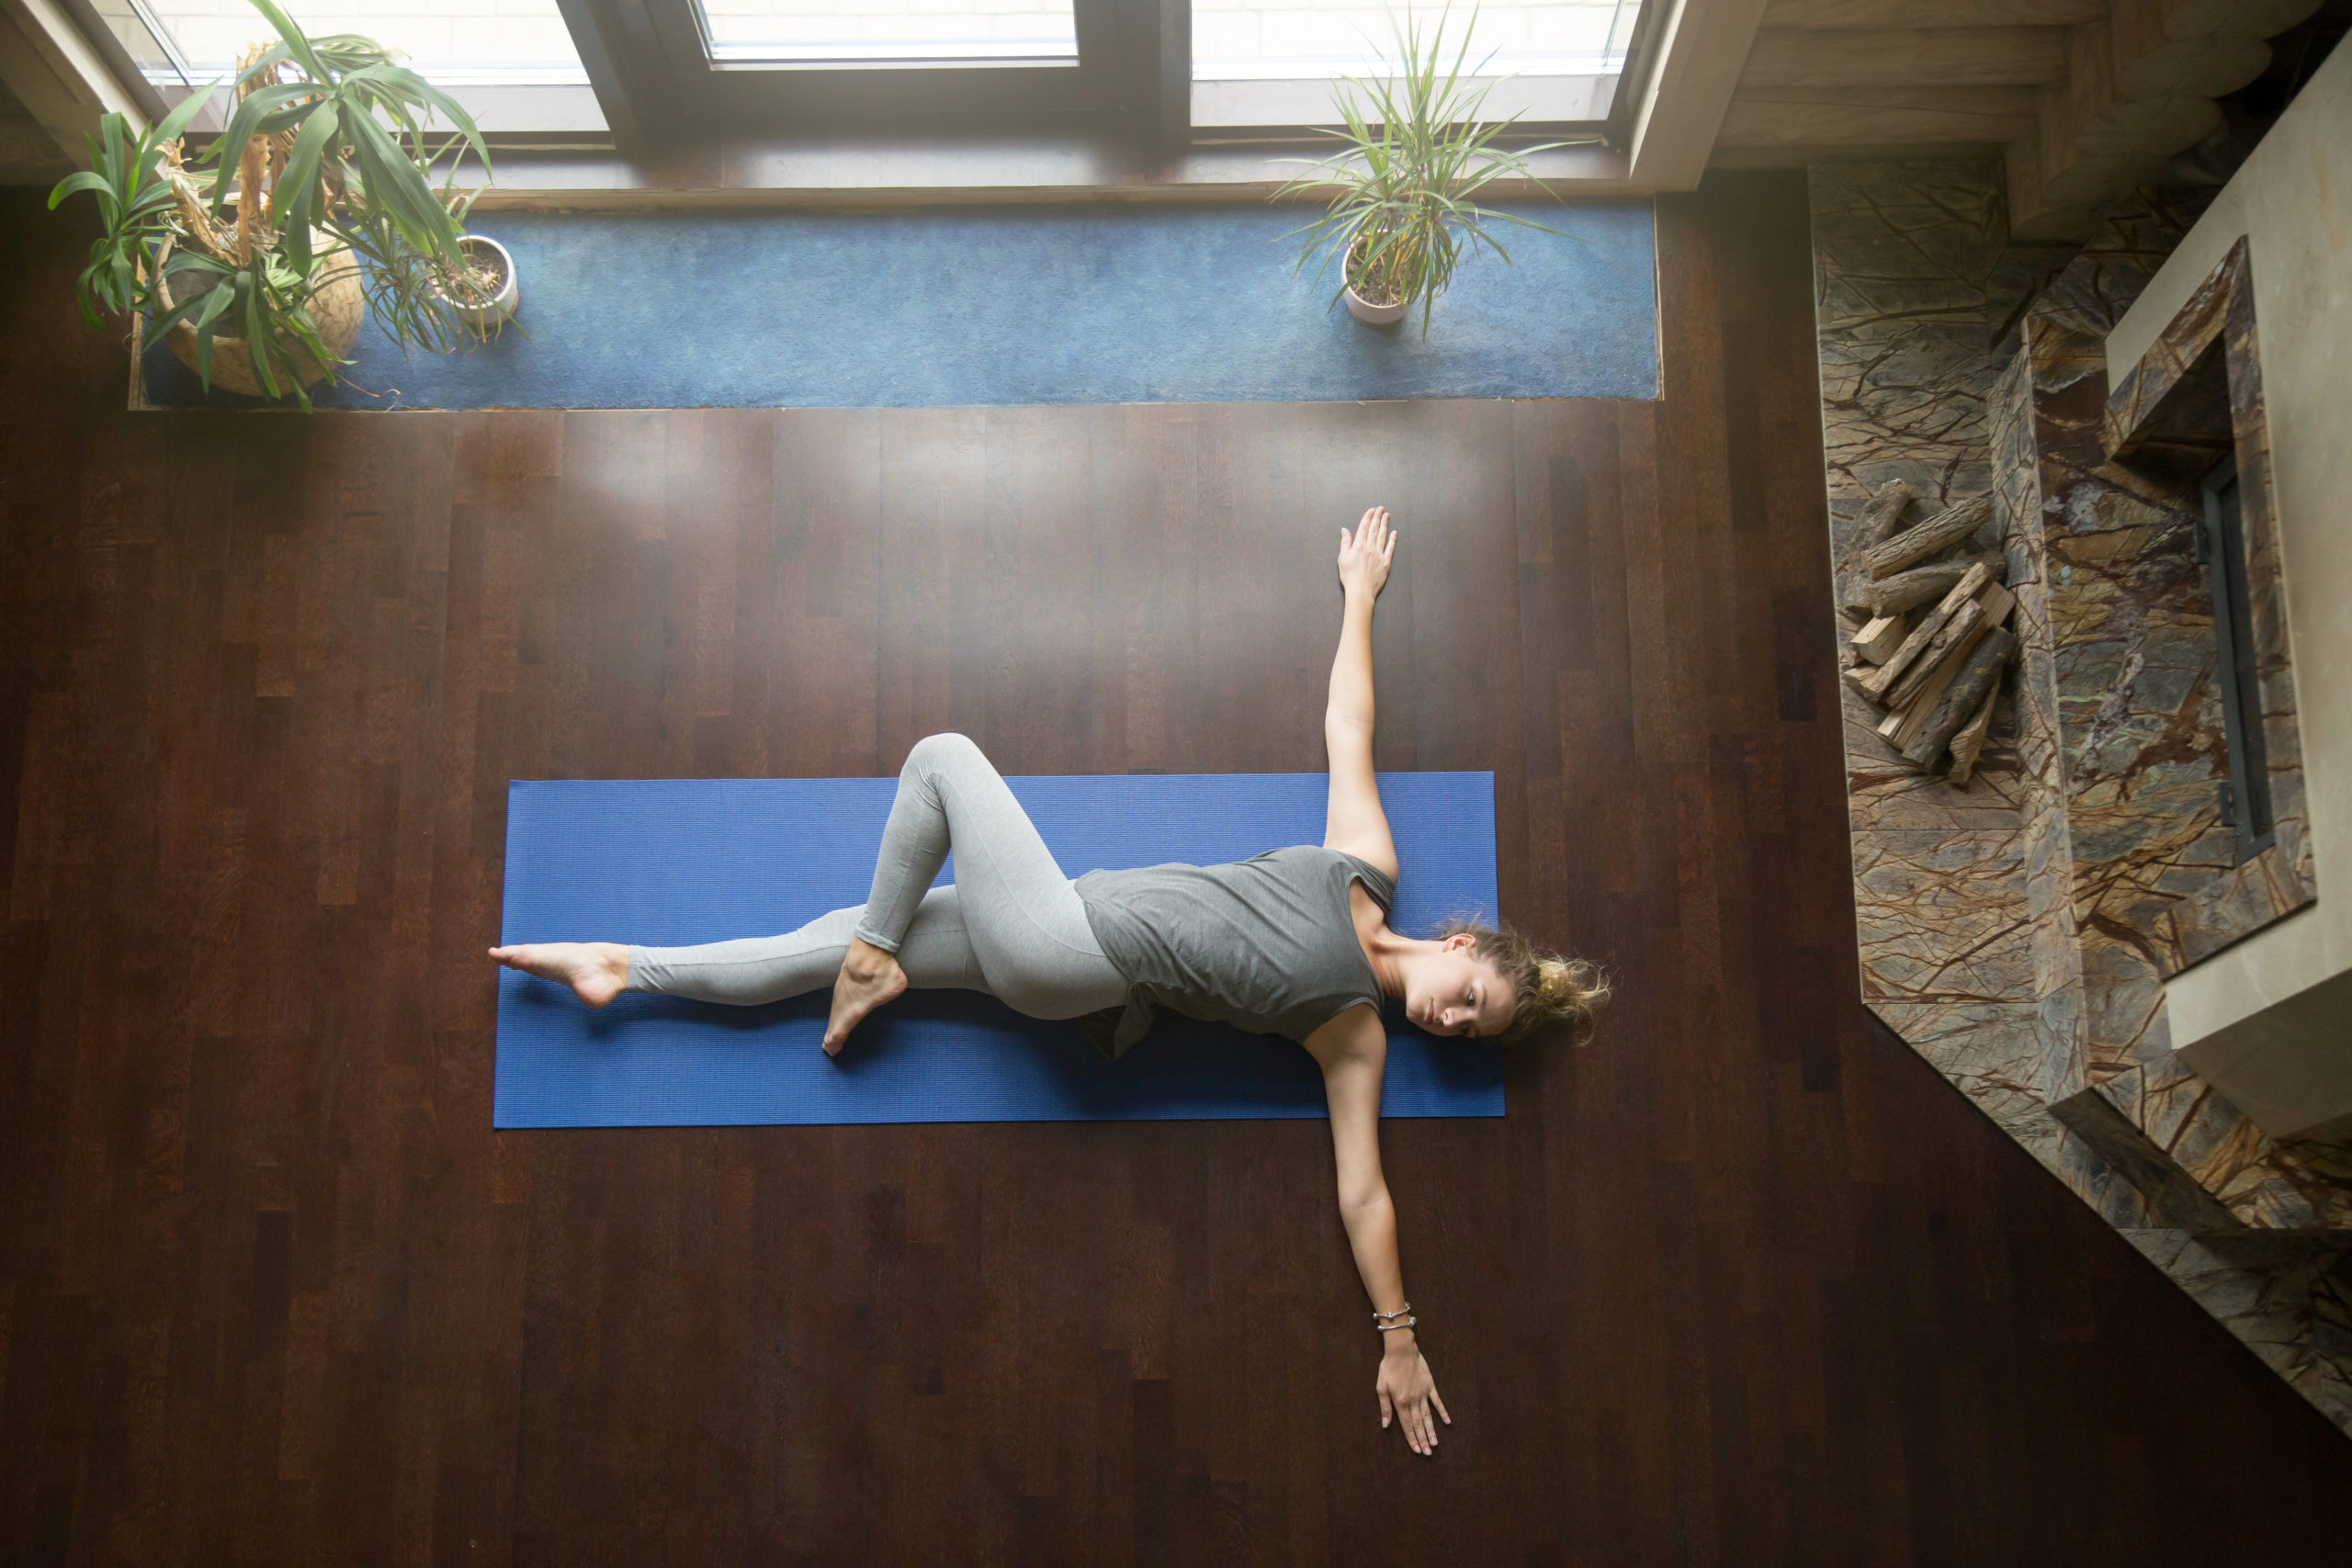 A woman performs a spinal twist stretch, while laying on a blue yoga mat in her home.